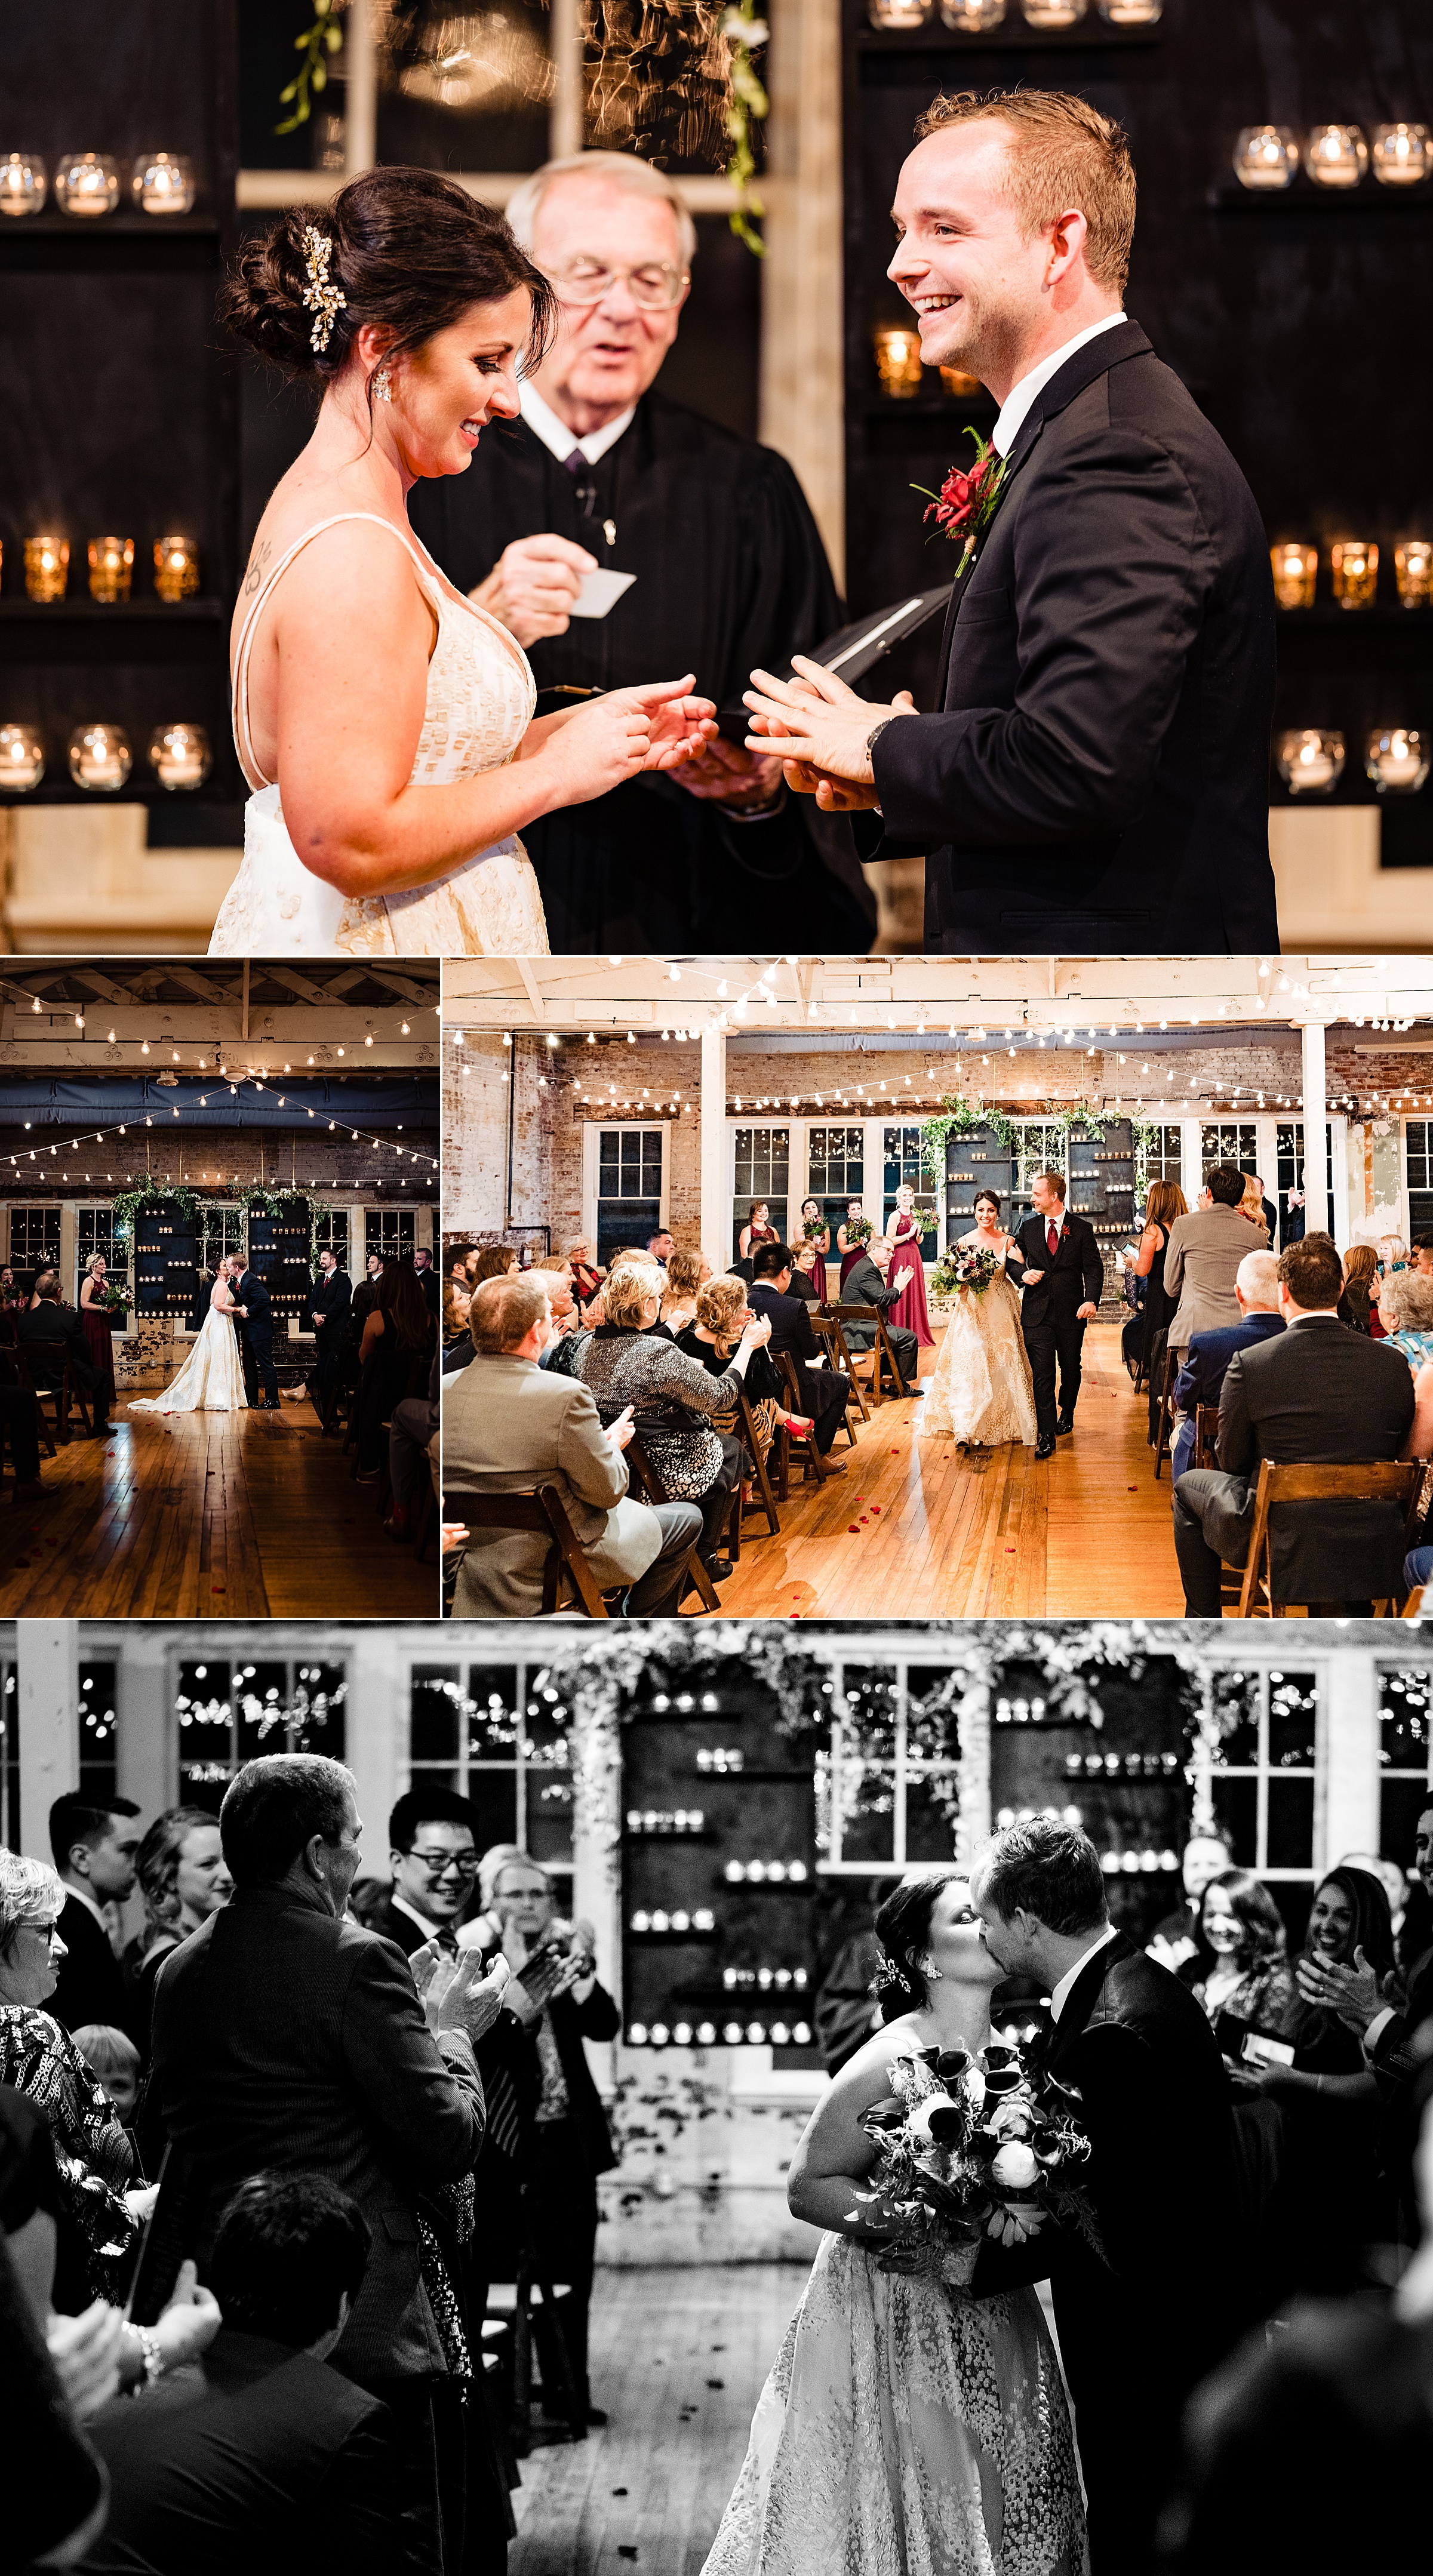 Photos from a wedding ceremony at the Stockroom in downtown Raleigh. Bride and groom laugh while exchanging vows, kiss, and recess down the aisle | kivusandcamera.com